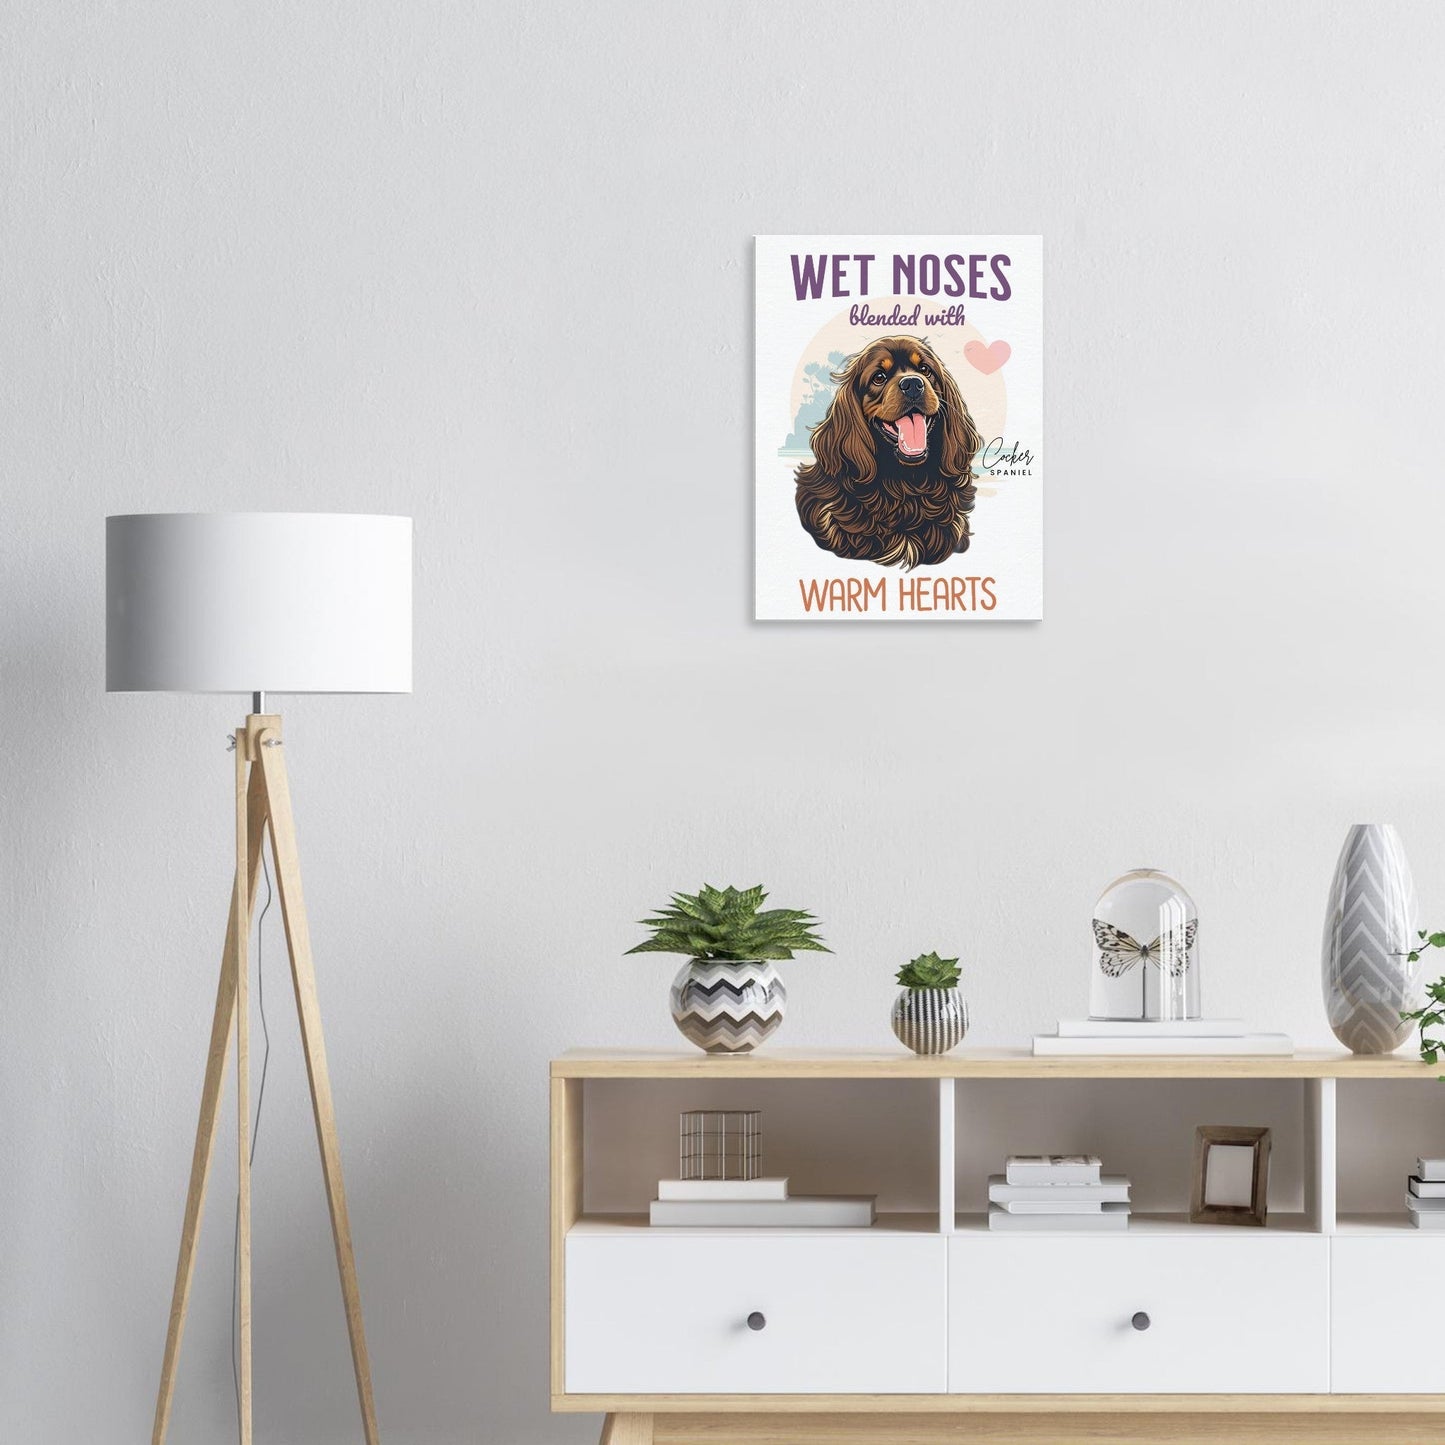 Cocker Spaniel Gift Canvas59.99-(FREE Delivery) Shop now at itsaboutmydog.com, cocker spaniel charm, Cocker Spaniel dad, cocker spaniel decor, Cocker Spaniel gift, cocker spaniel gifts, Cocker Spaniel lover, cocker spaniel momma, Cocker Spaniel Print, dog canvas, english cocker spaniel